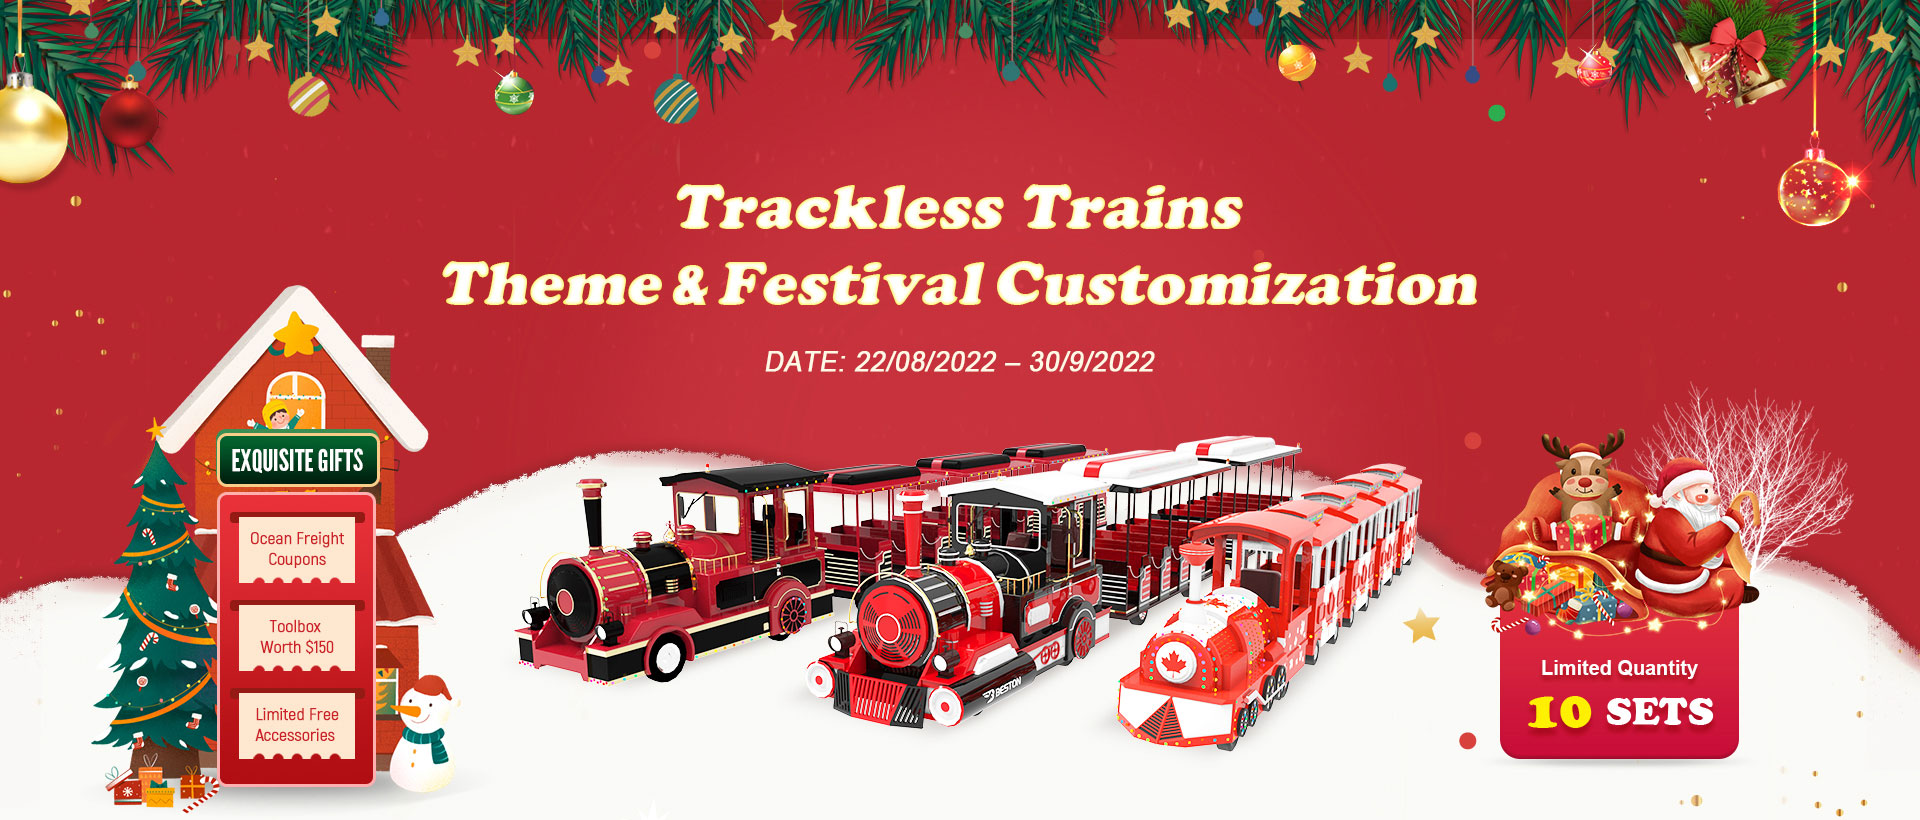 Popular trackless train promotion